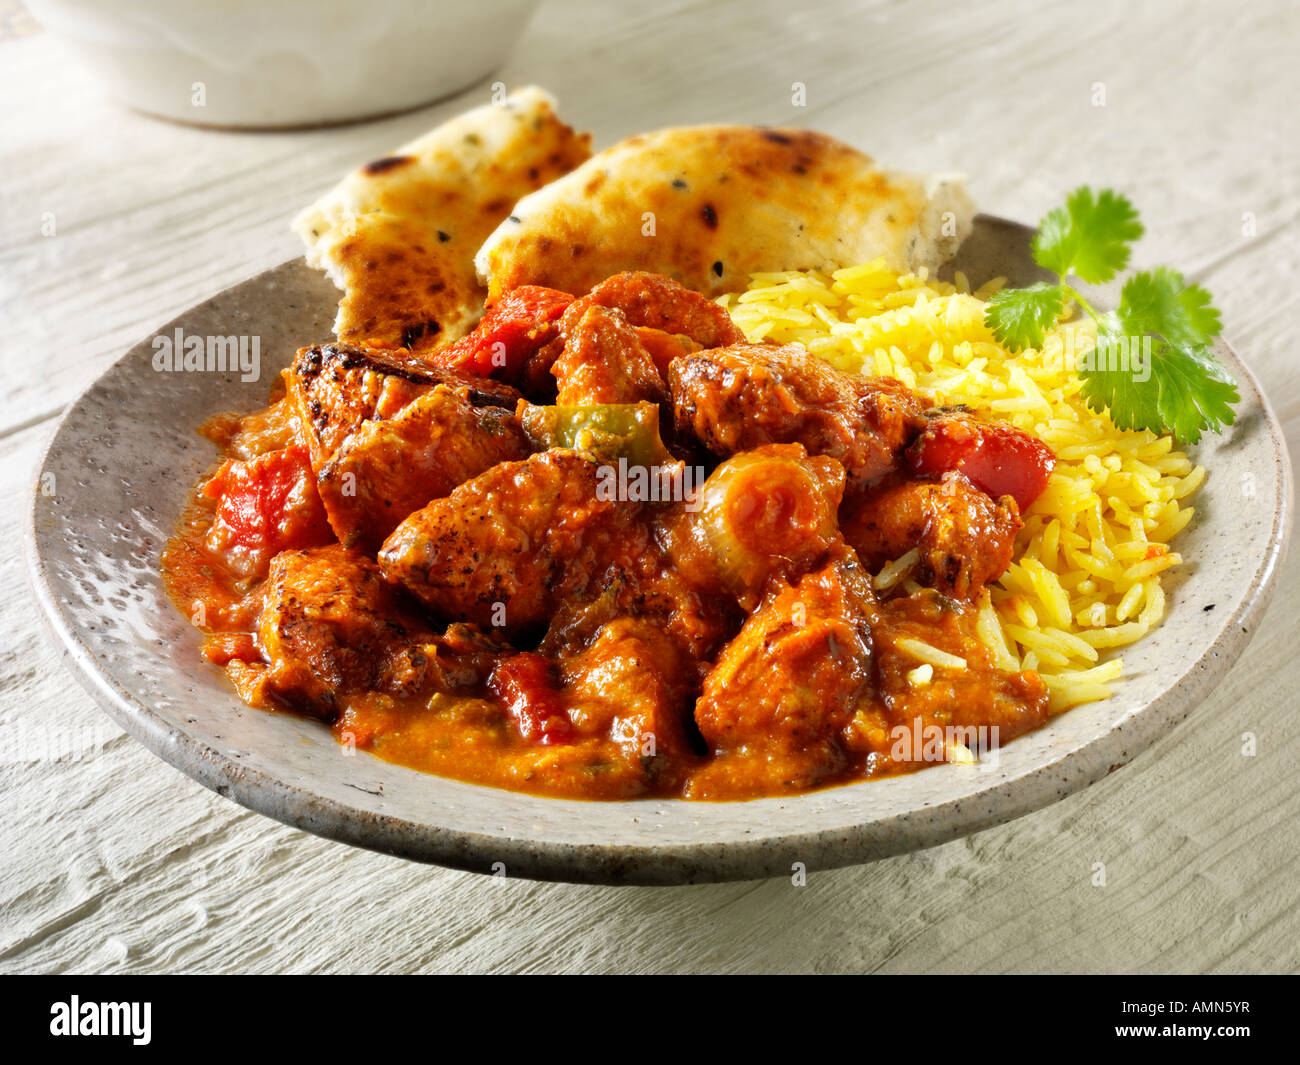 Indian Meal - Chicken Jalfrezi curry Stock Photo